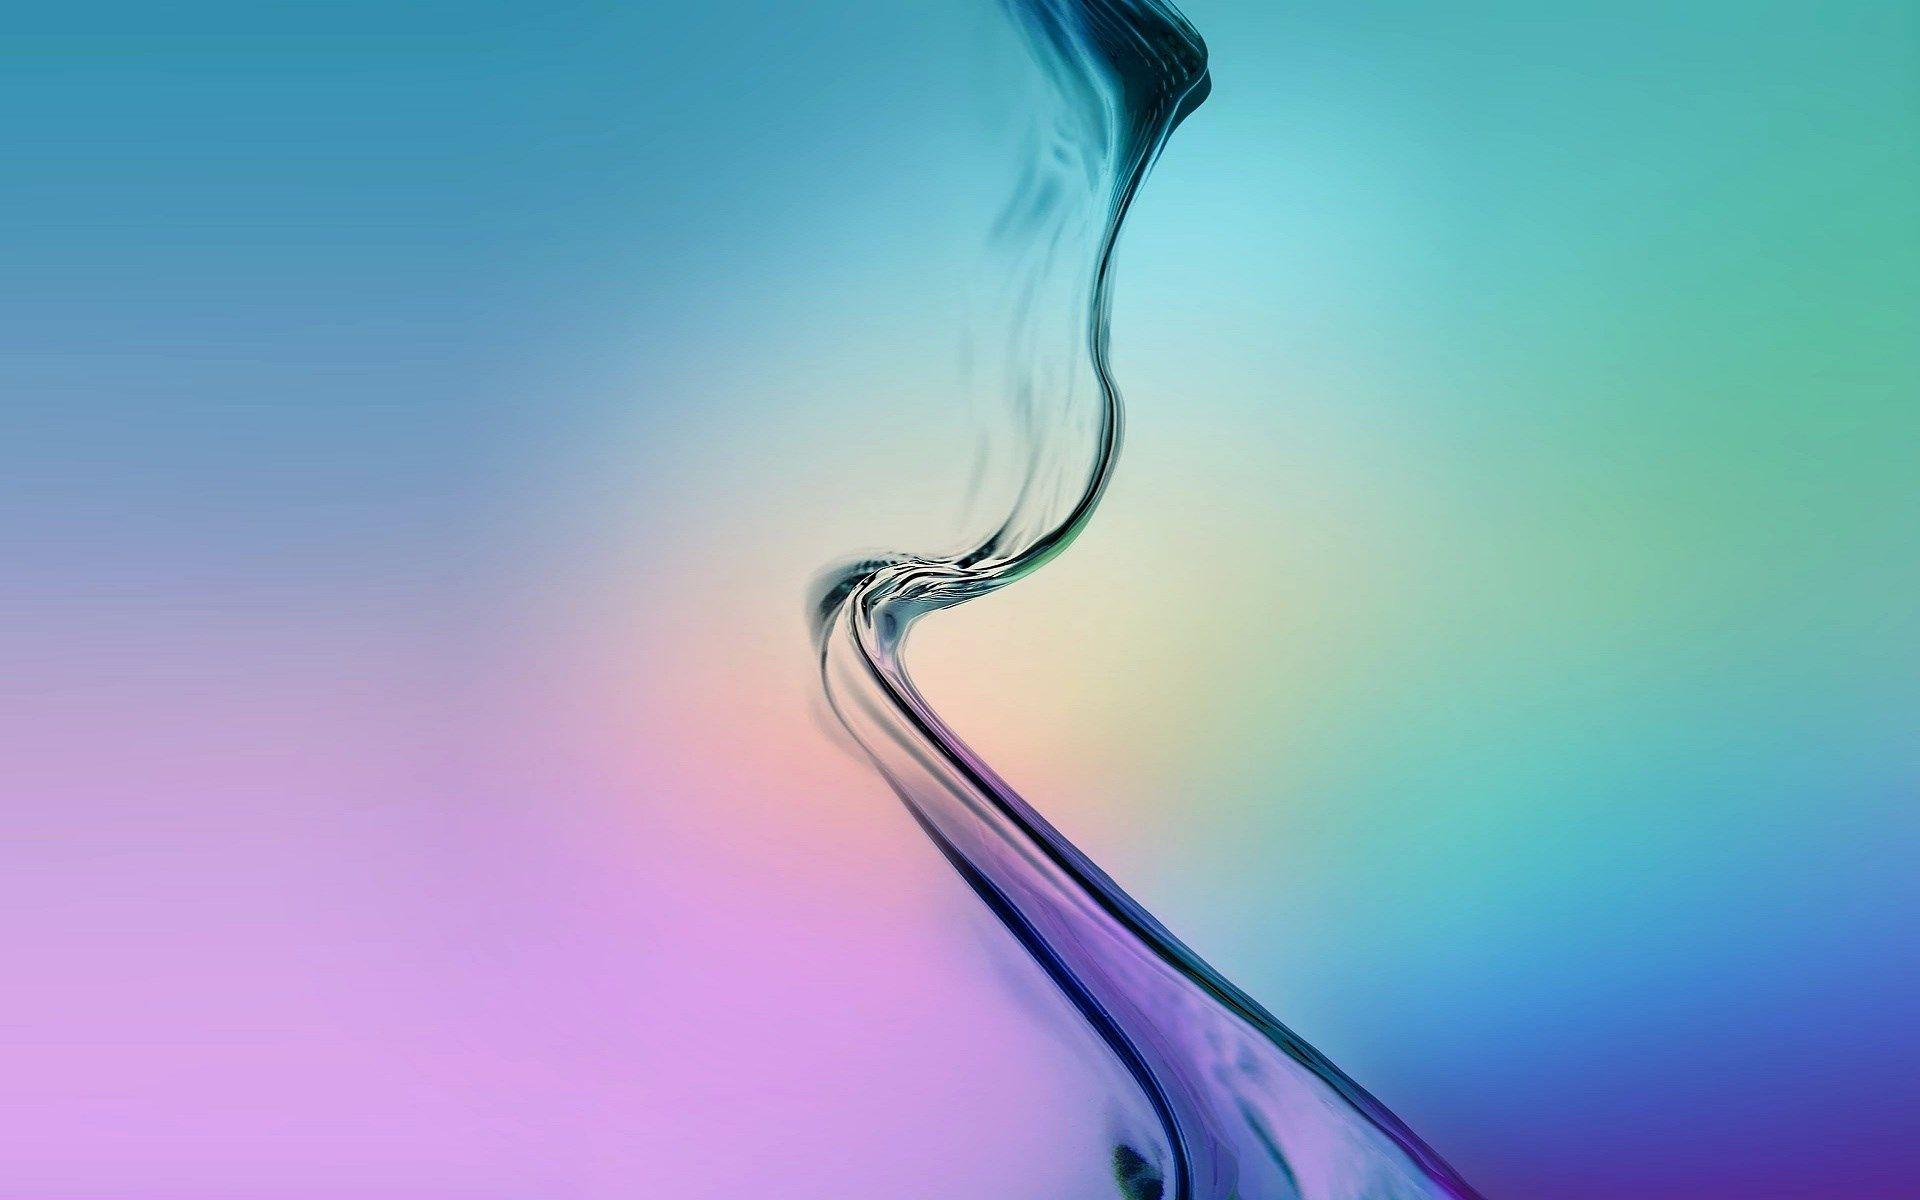 samsung galaxy a8 stock wallpapers